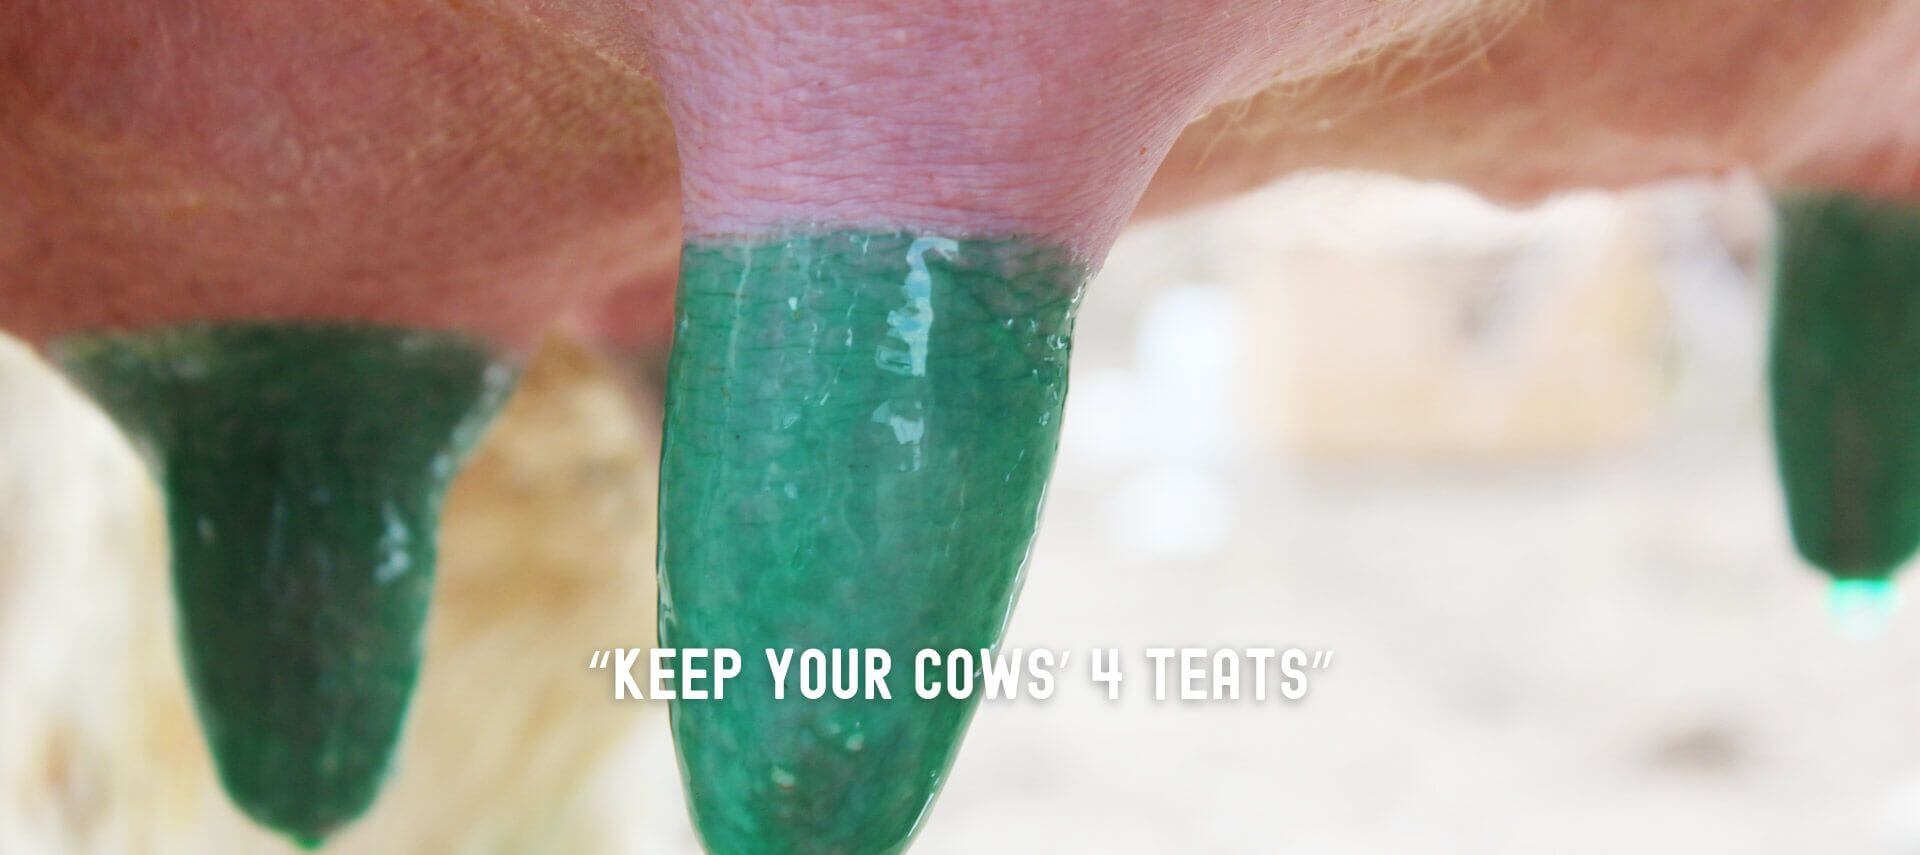 Keep your cows with 4 tits